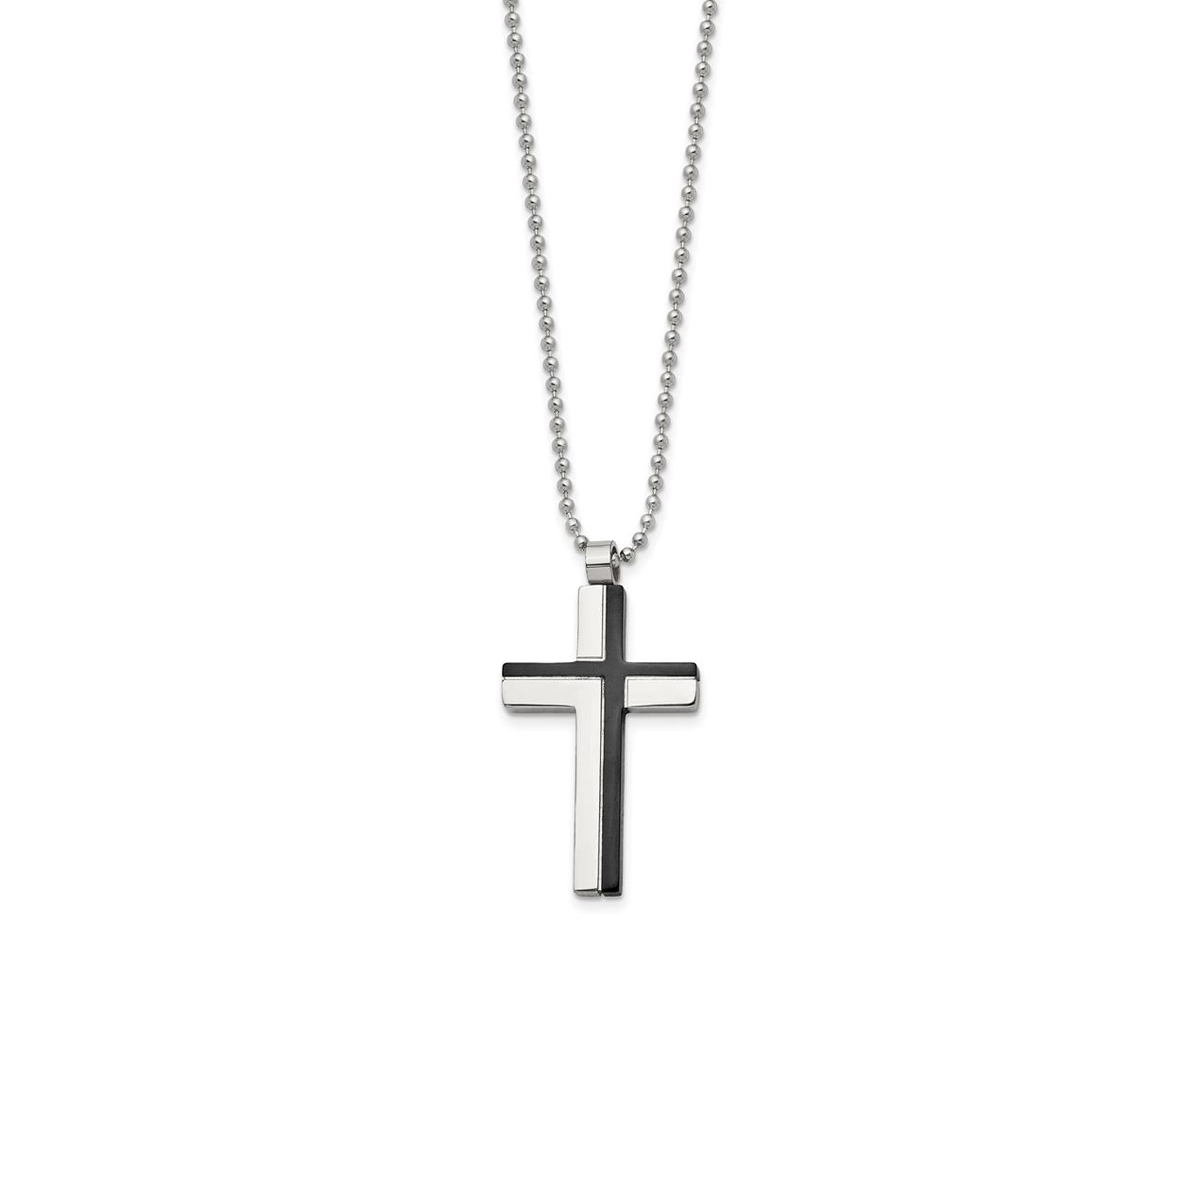 Stainless Steel and Black Lasercut Cross Pendant with Chain